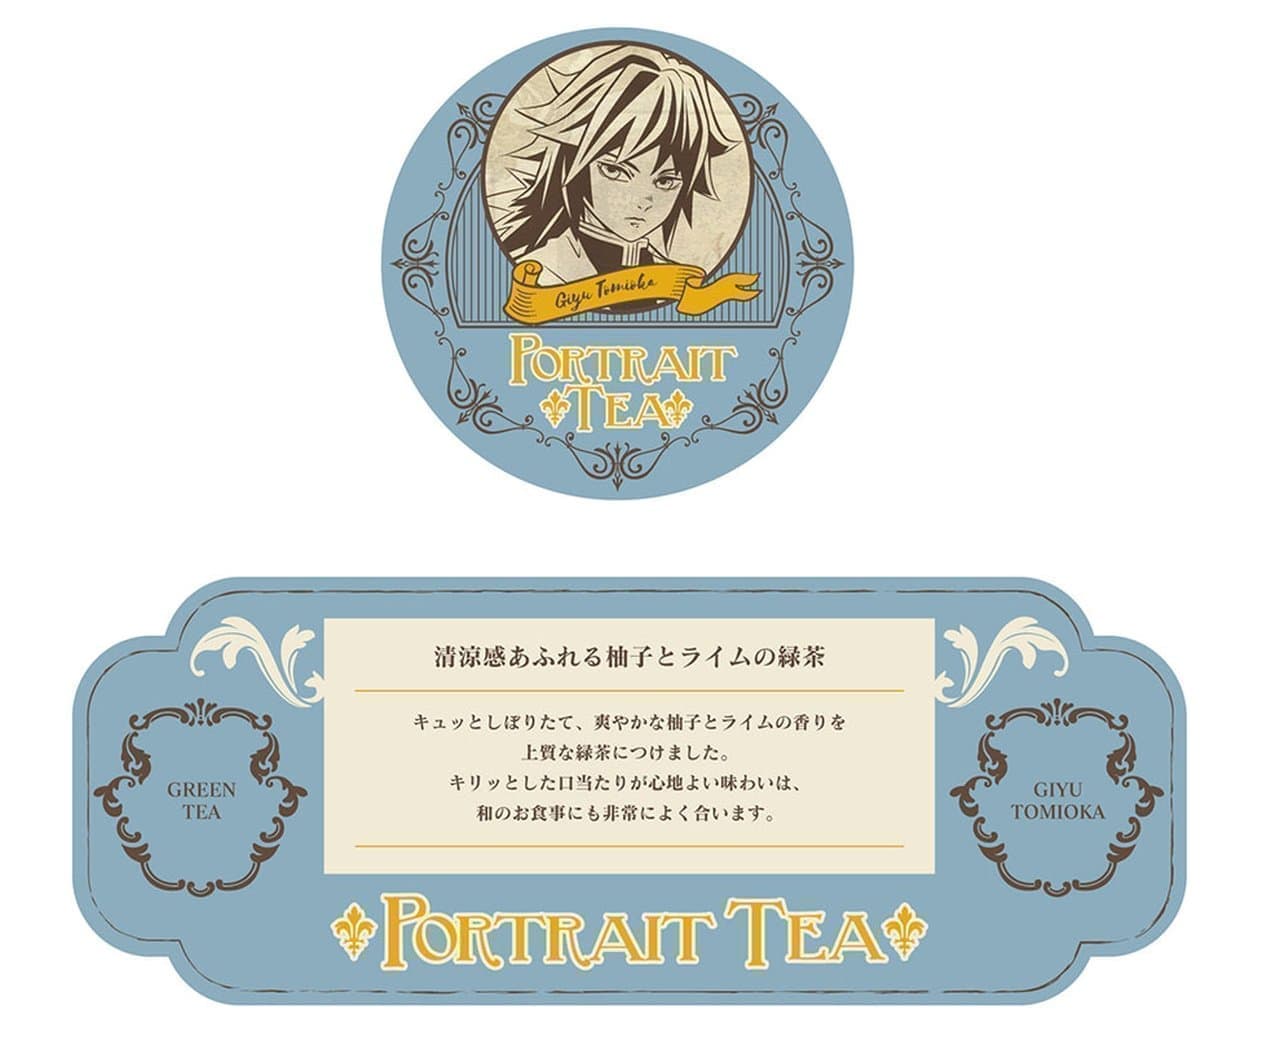 Flavored tea inspired by the character of "Demon Slayer"